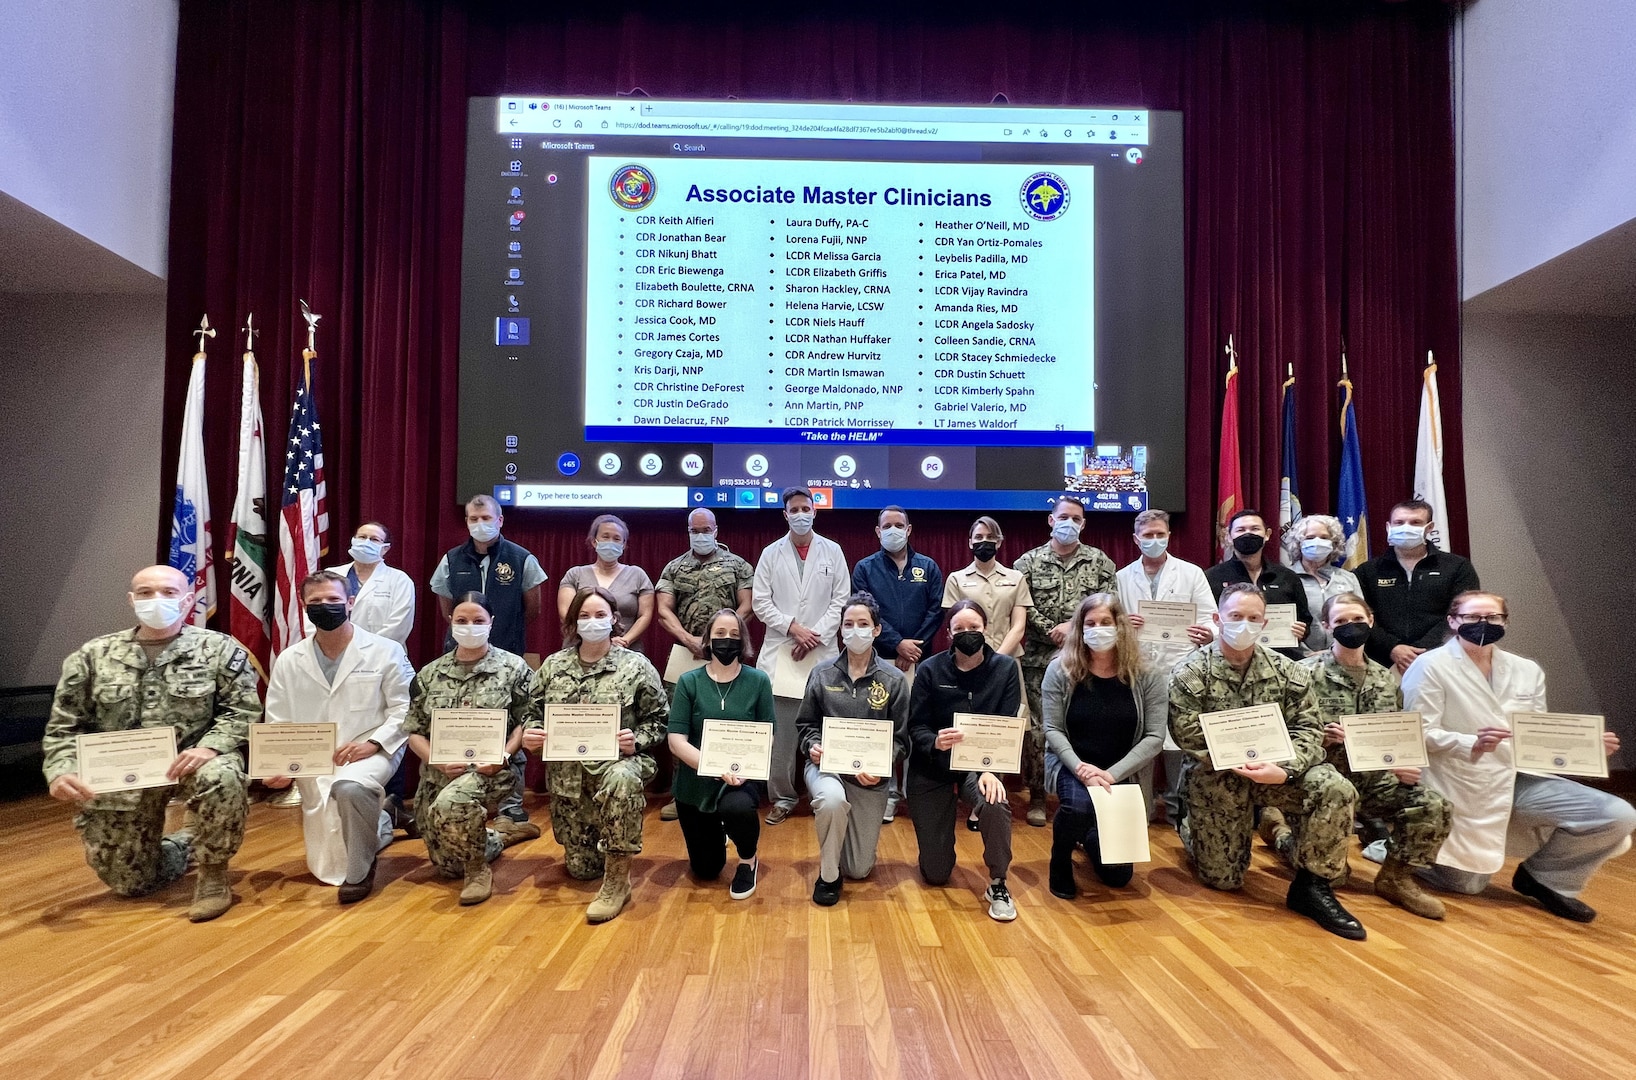 Junior clinicians who are honored as Associate Master Clinicians during a ceremony at Naval Medical Center San Diego's (NMCSD) auditorium gather for a group photo on Aug. 10. During the ceremony, 24 senior clinicians received the Master Clinician Award and 39 other clinicians were recognized as Associate Ma